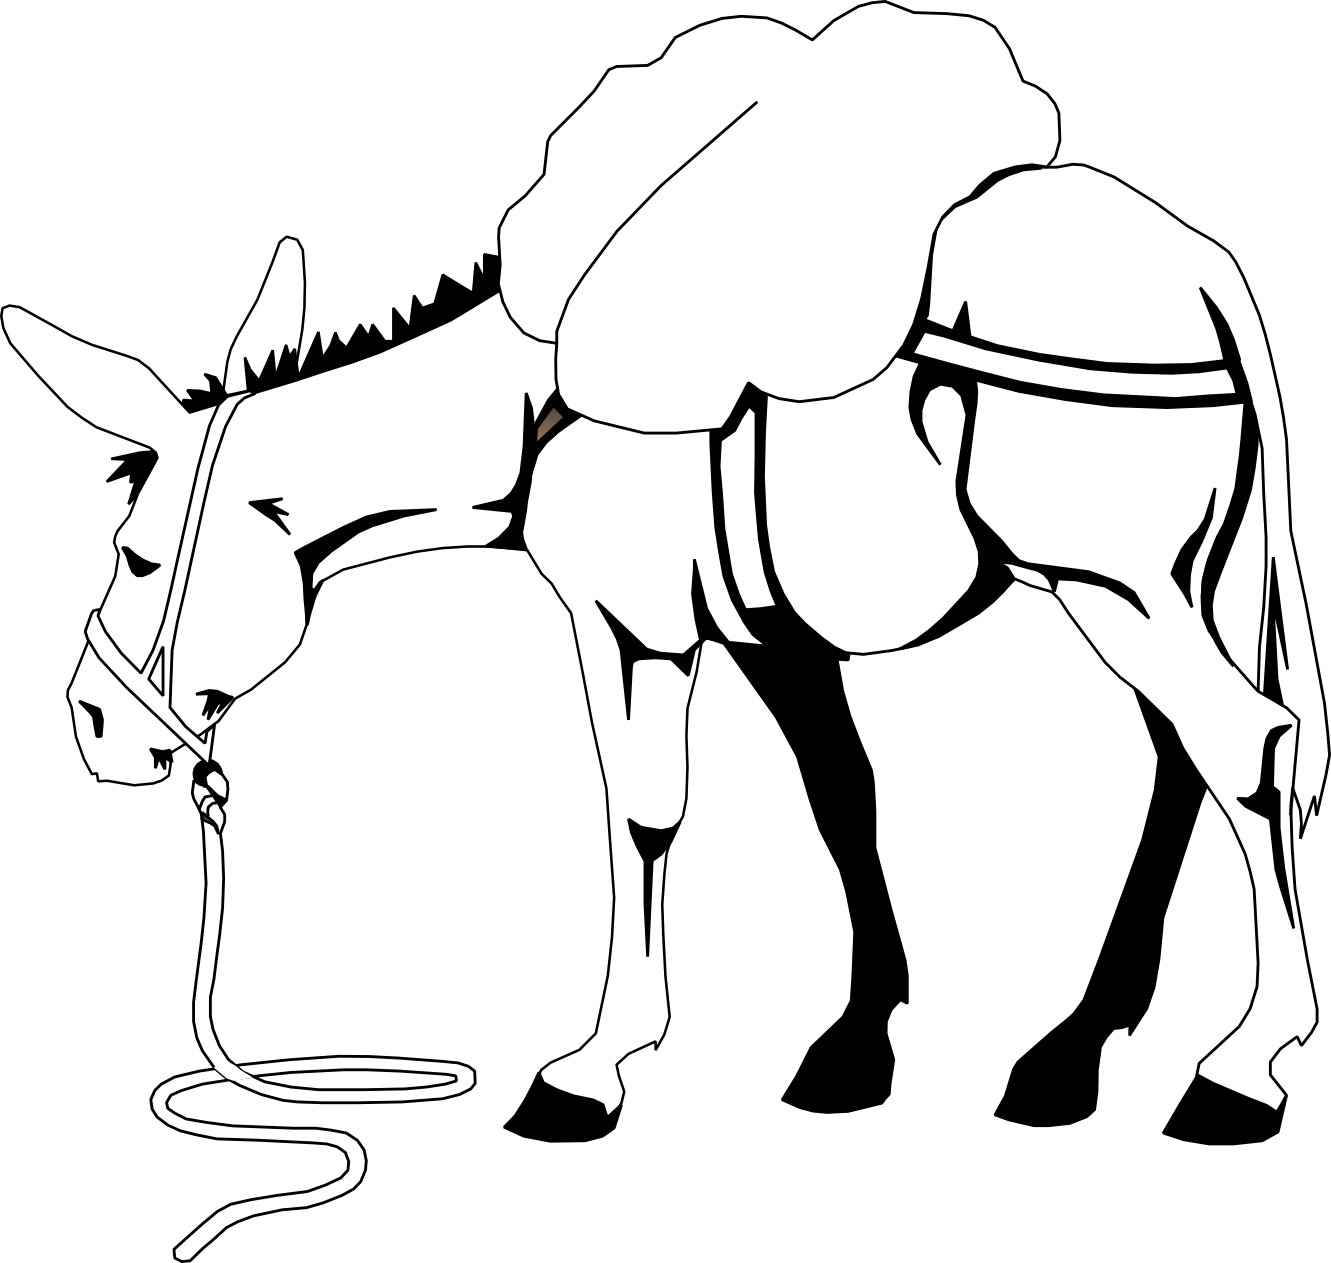 Mule clipart black and white, Mule black and white